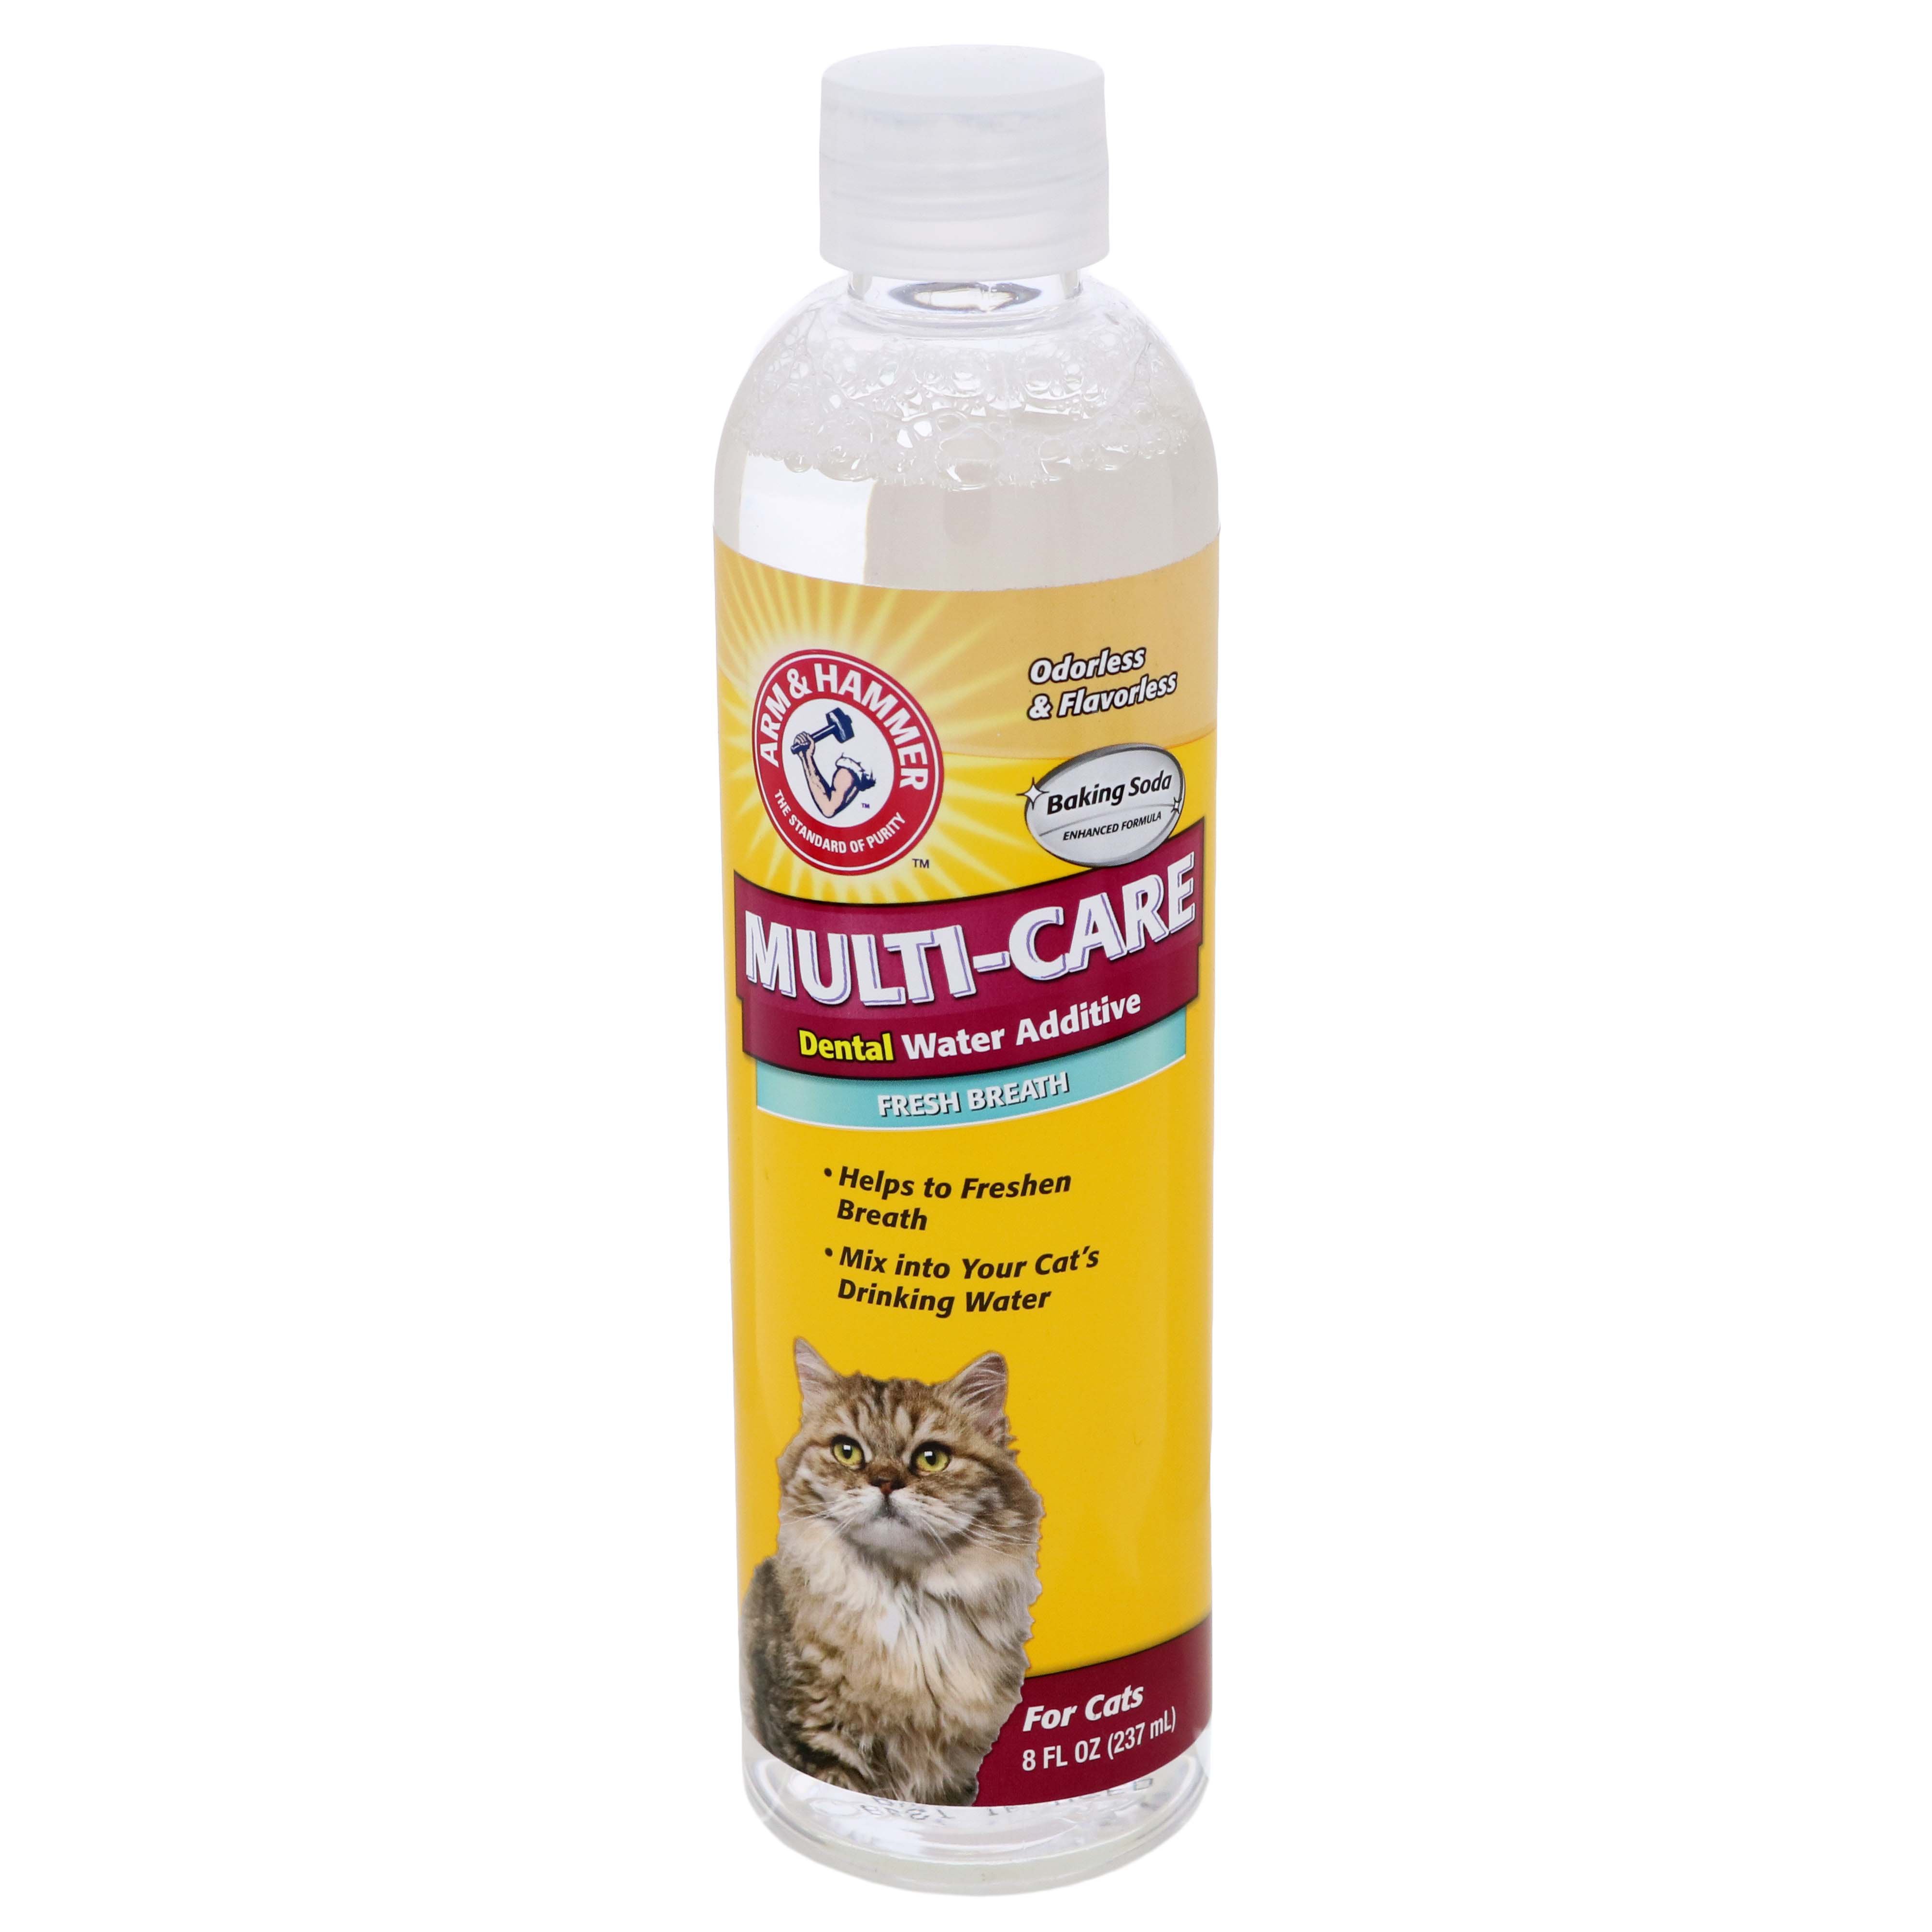 Arm & Hammer Cat Multi Care Dental Water Additive Shop Cats at HEB